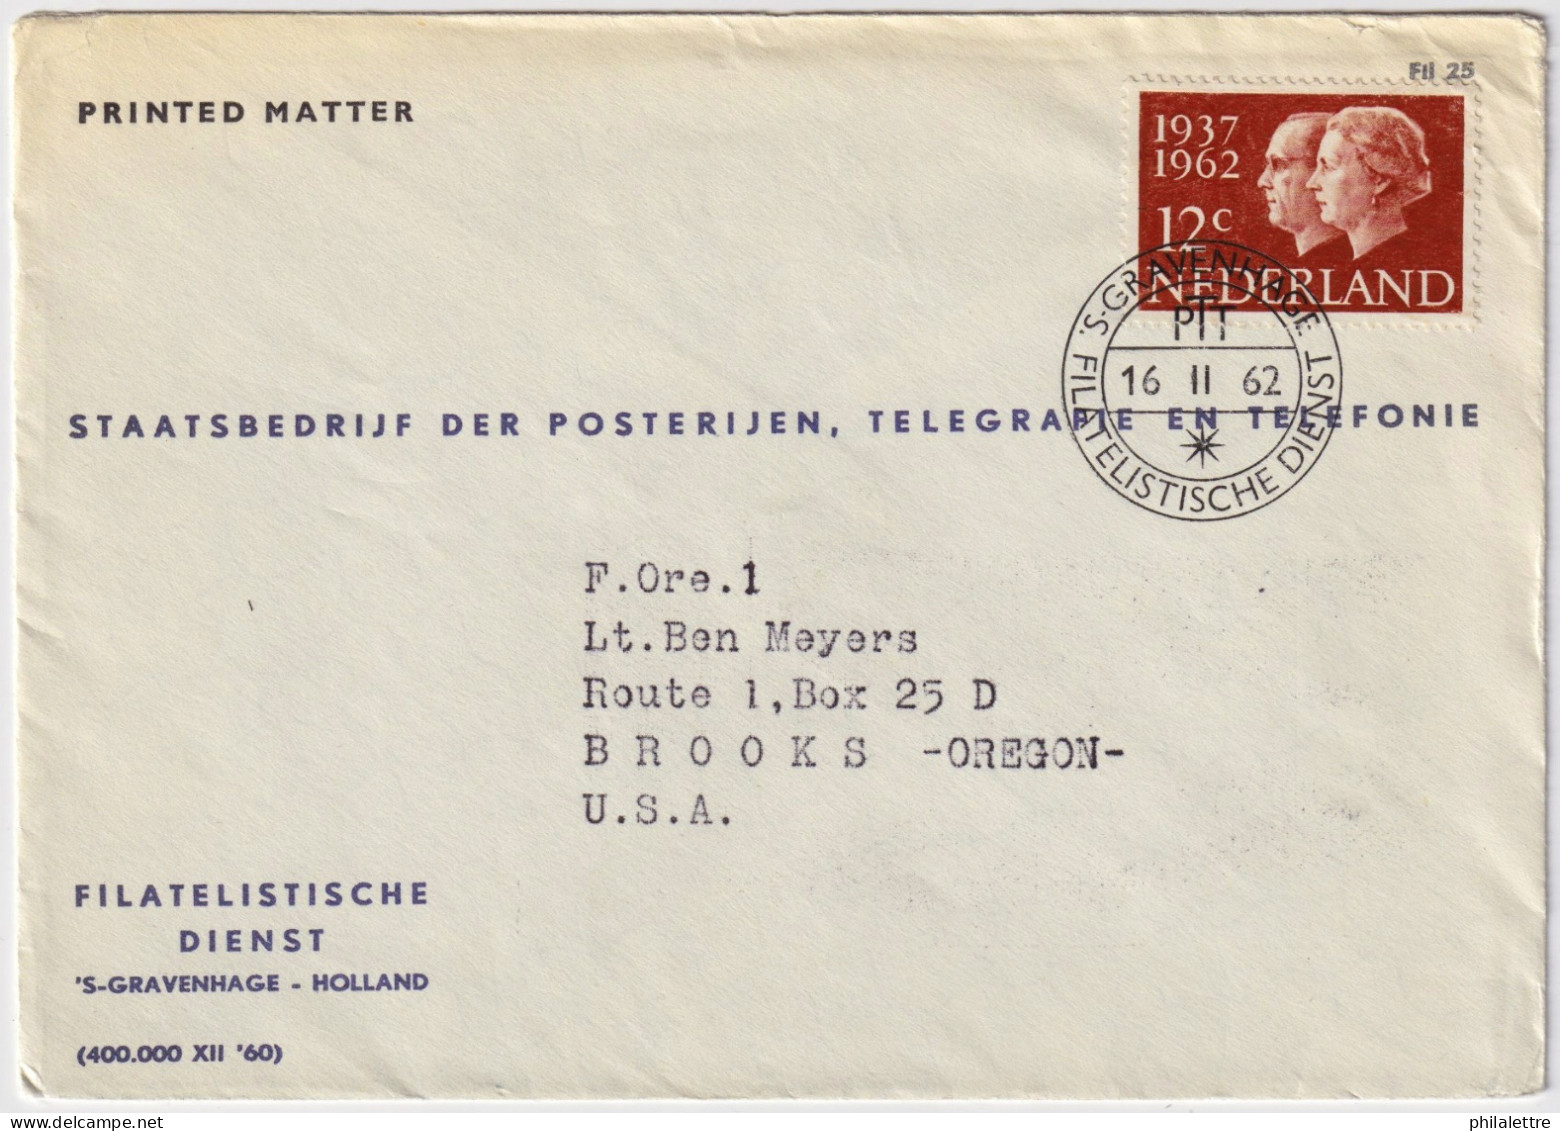 PAYS-BAS / THE NETHERLANDS - 1962 Mi.772 On PTT Cover From 'S-GRAVENHAGE To BROOKS, Oregon, USA - Briefe U. Dokumente